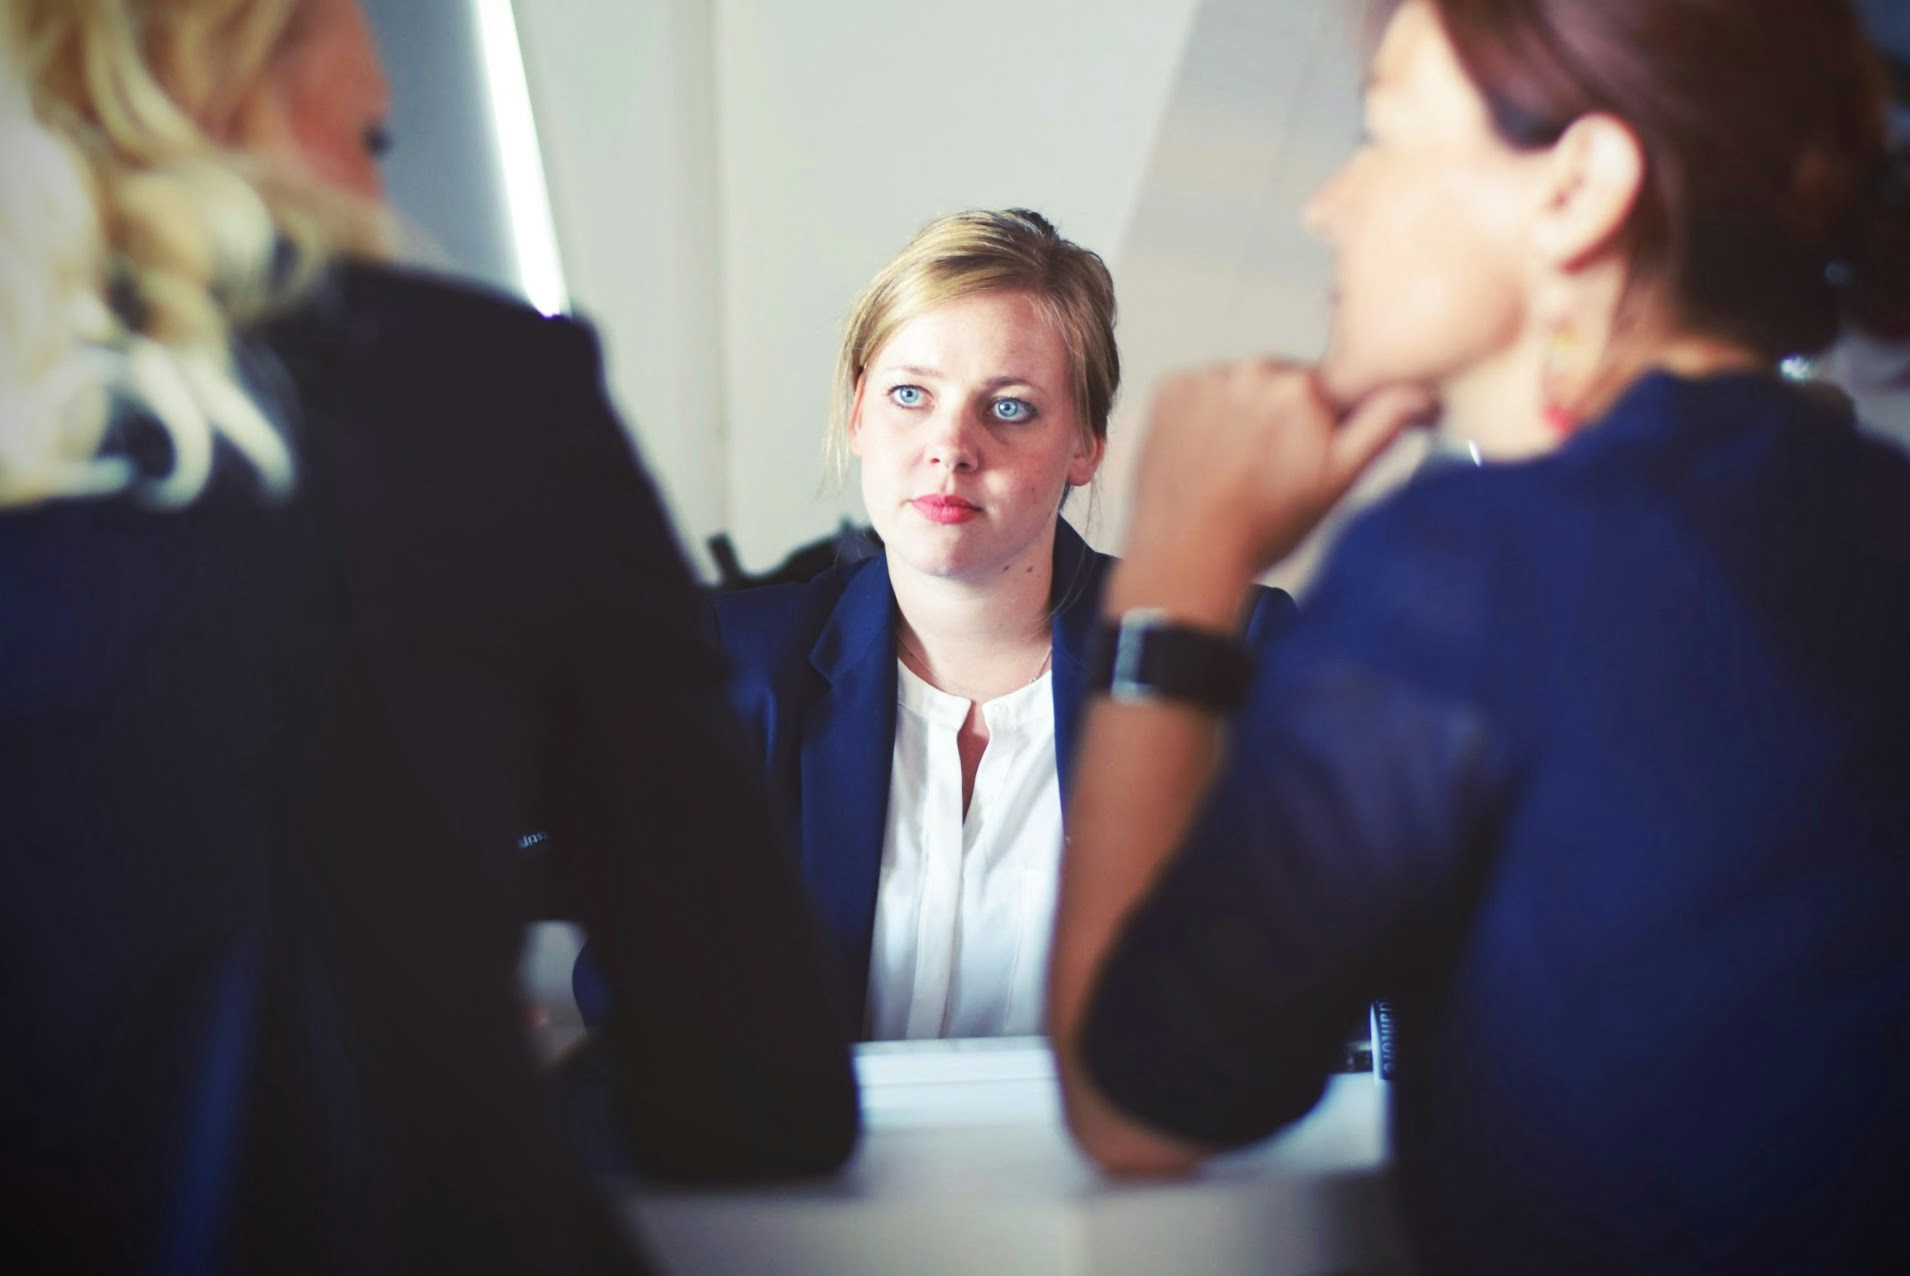 5 signs mediation is needed in leadership conflict